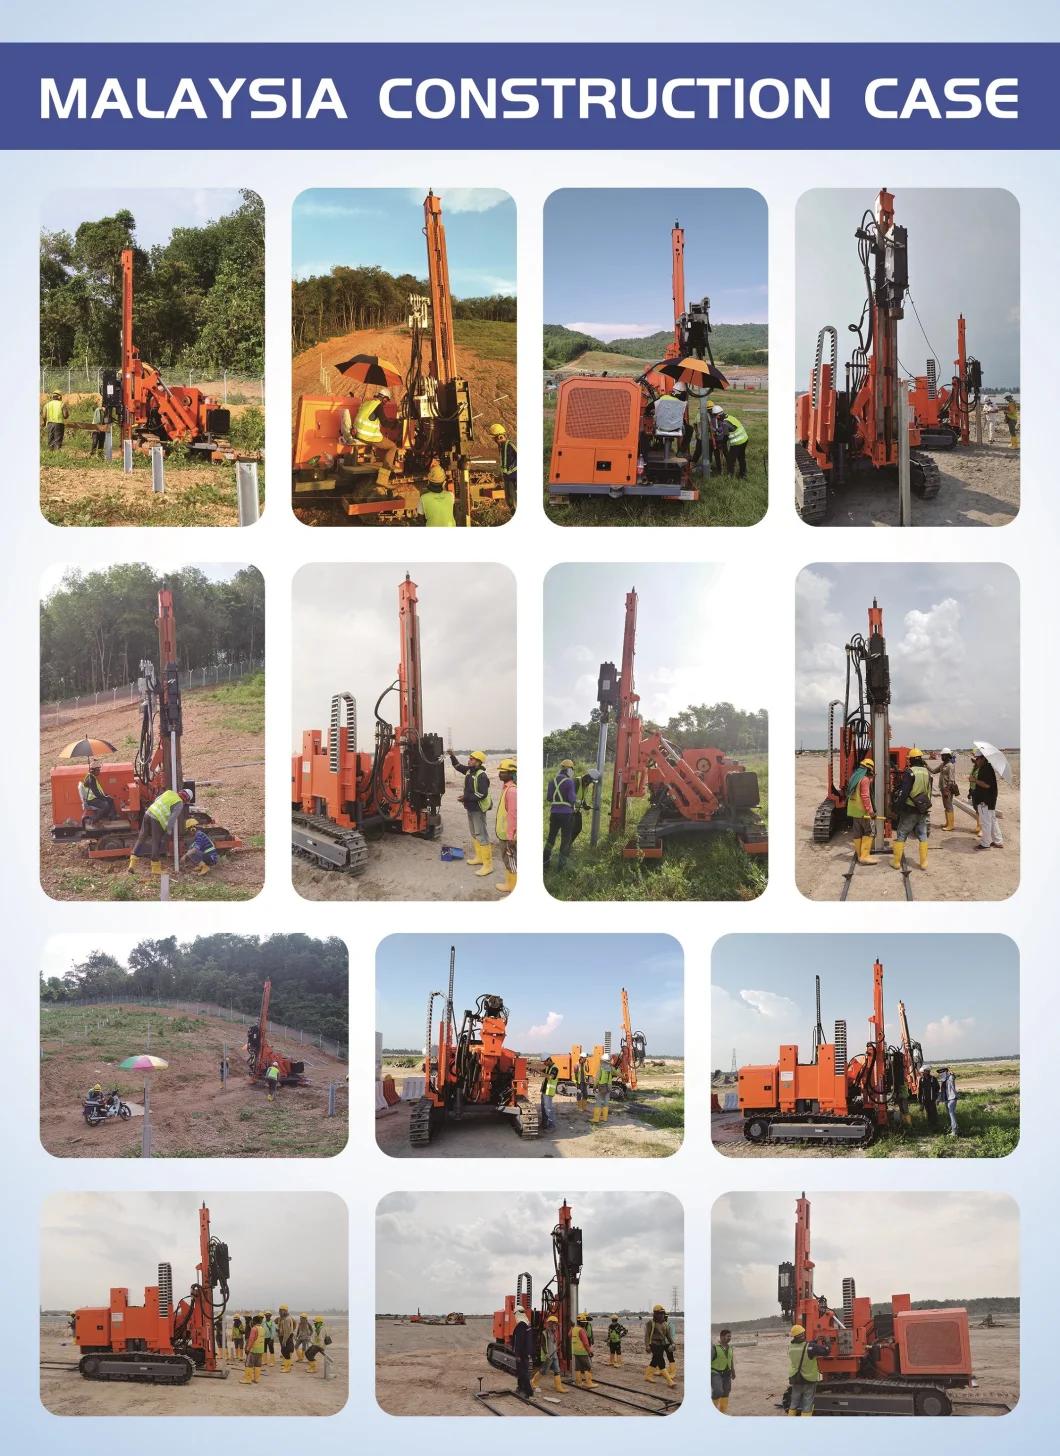 Ground Solar Pile Driver Machine for Photovoltaic Piles Ramming Construction